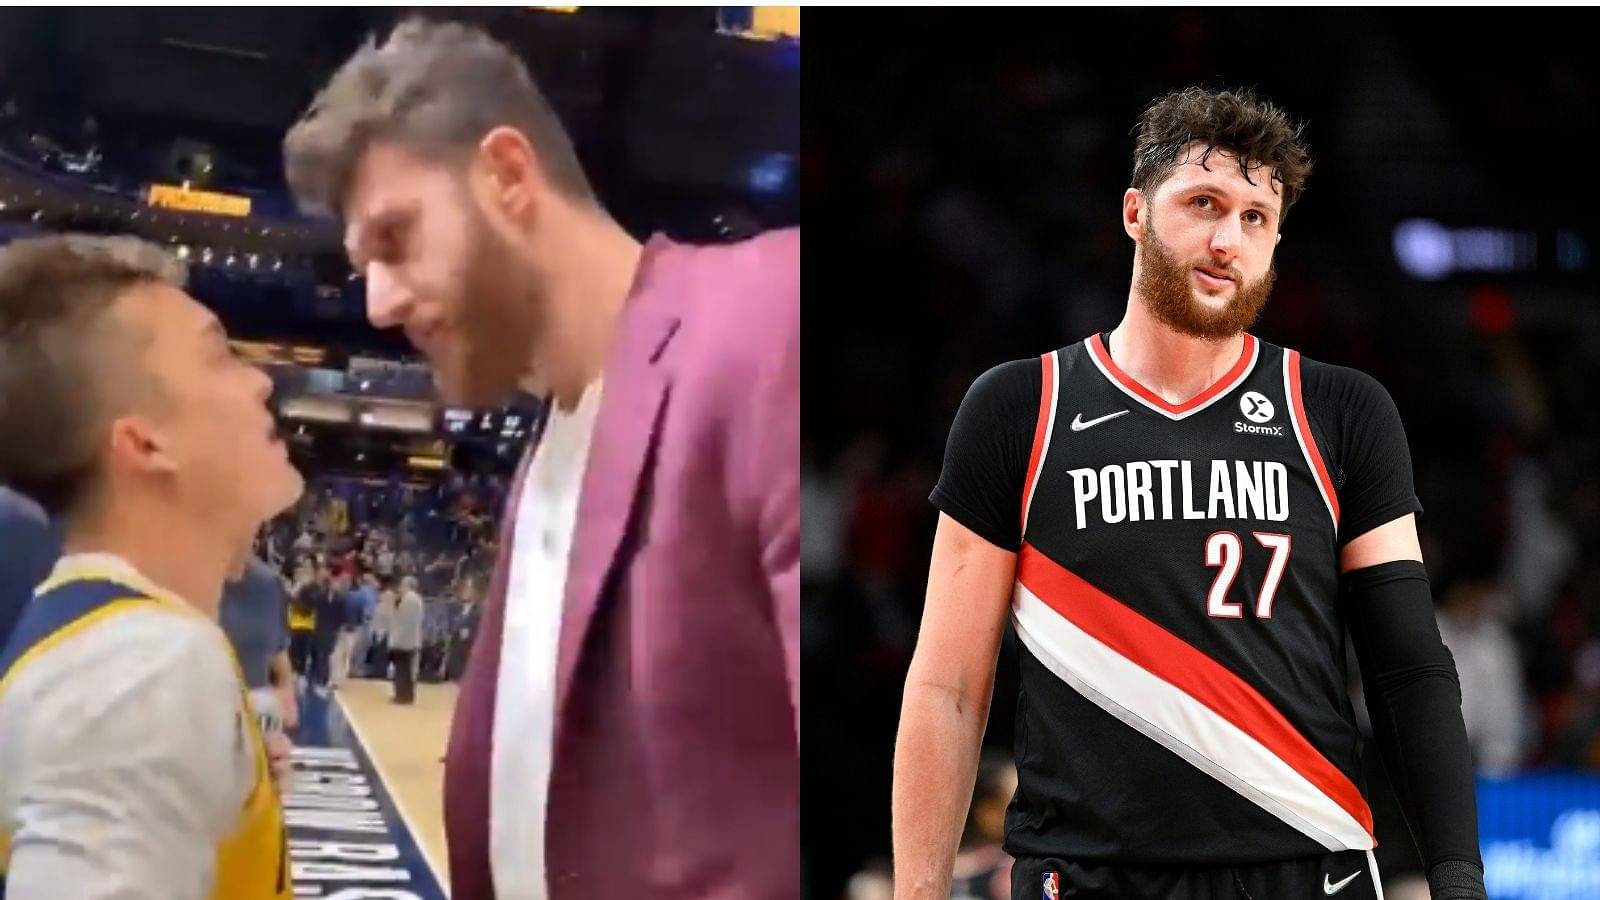 "Jusuf Nurkic tosses a fan's phone courtside": The Bosnian international first stares a guy down and then does something that will land him in trouble